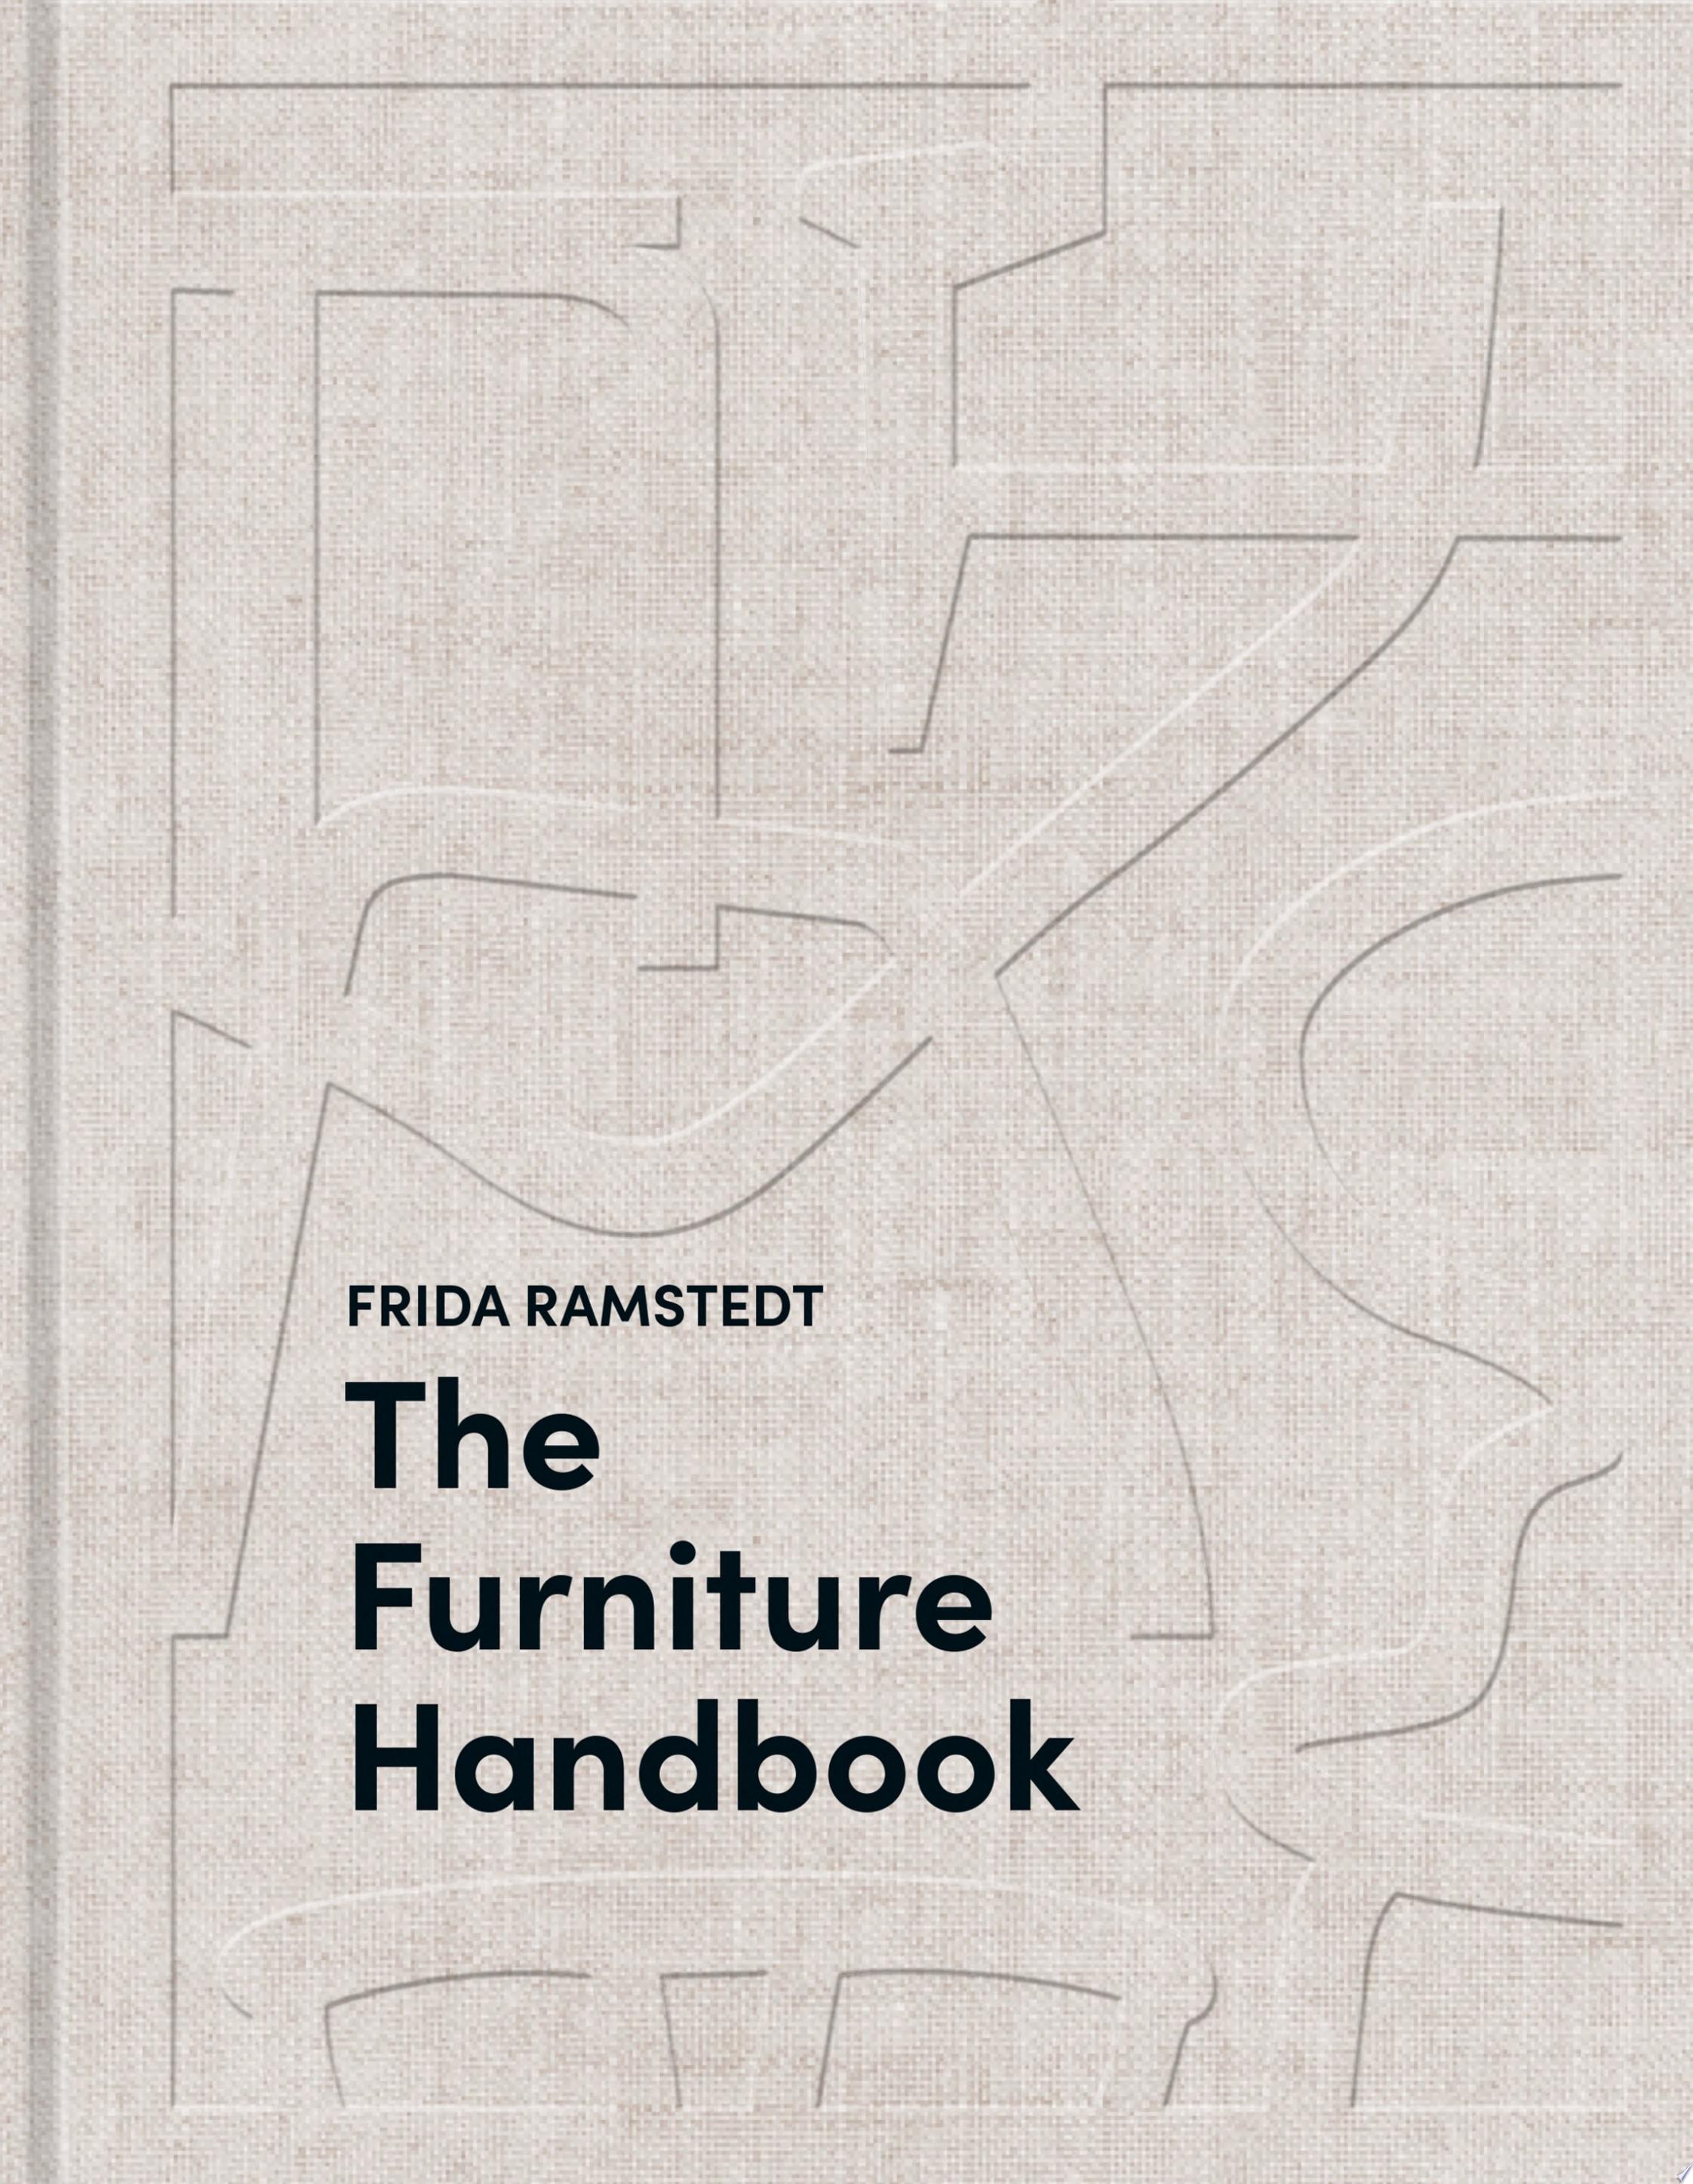 Image for "The Furniture Handbook"